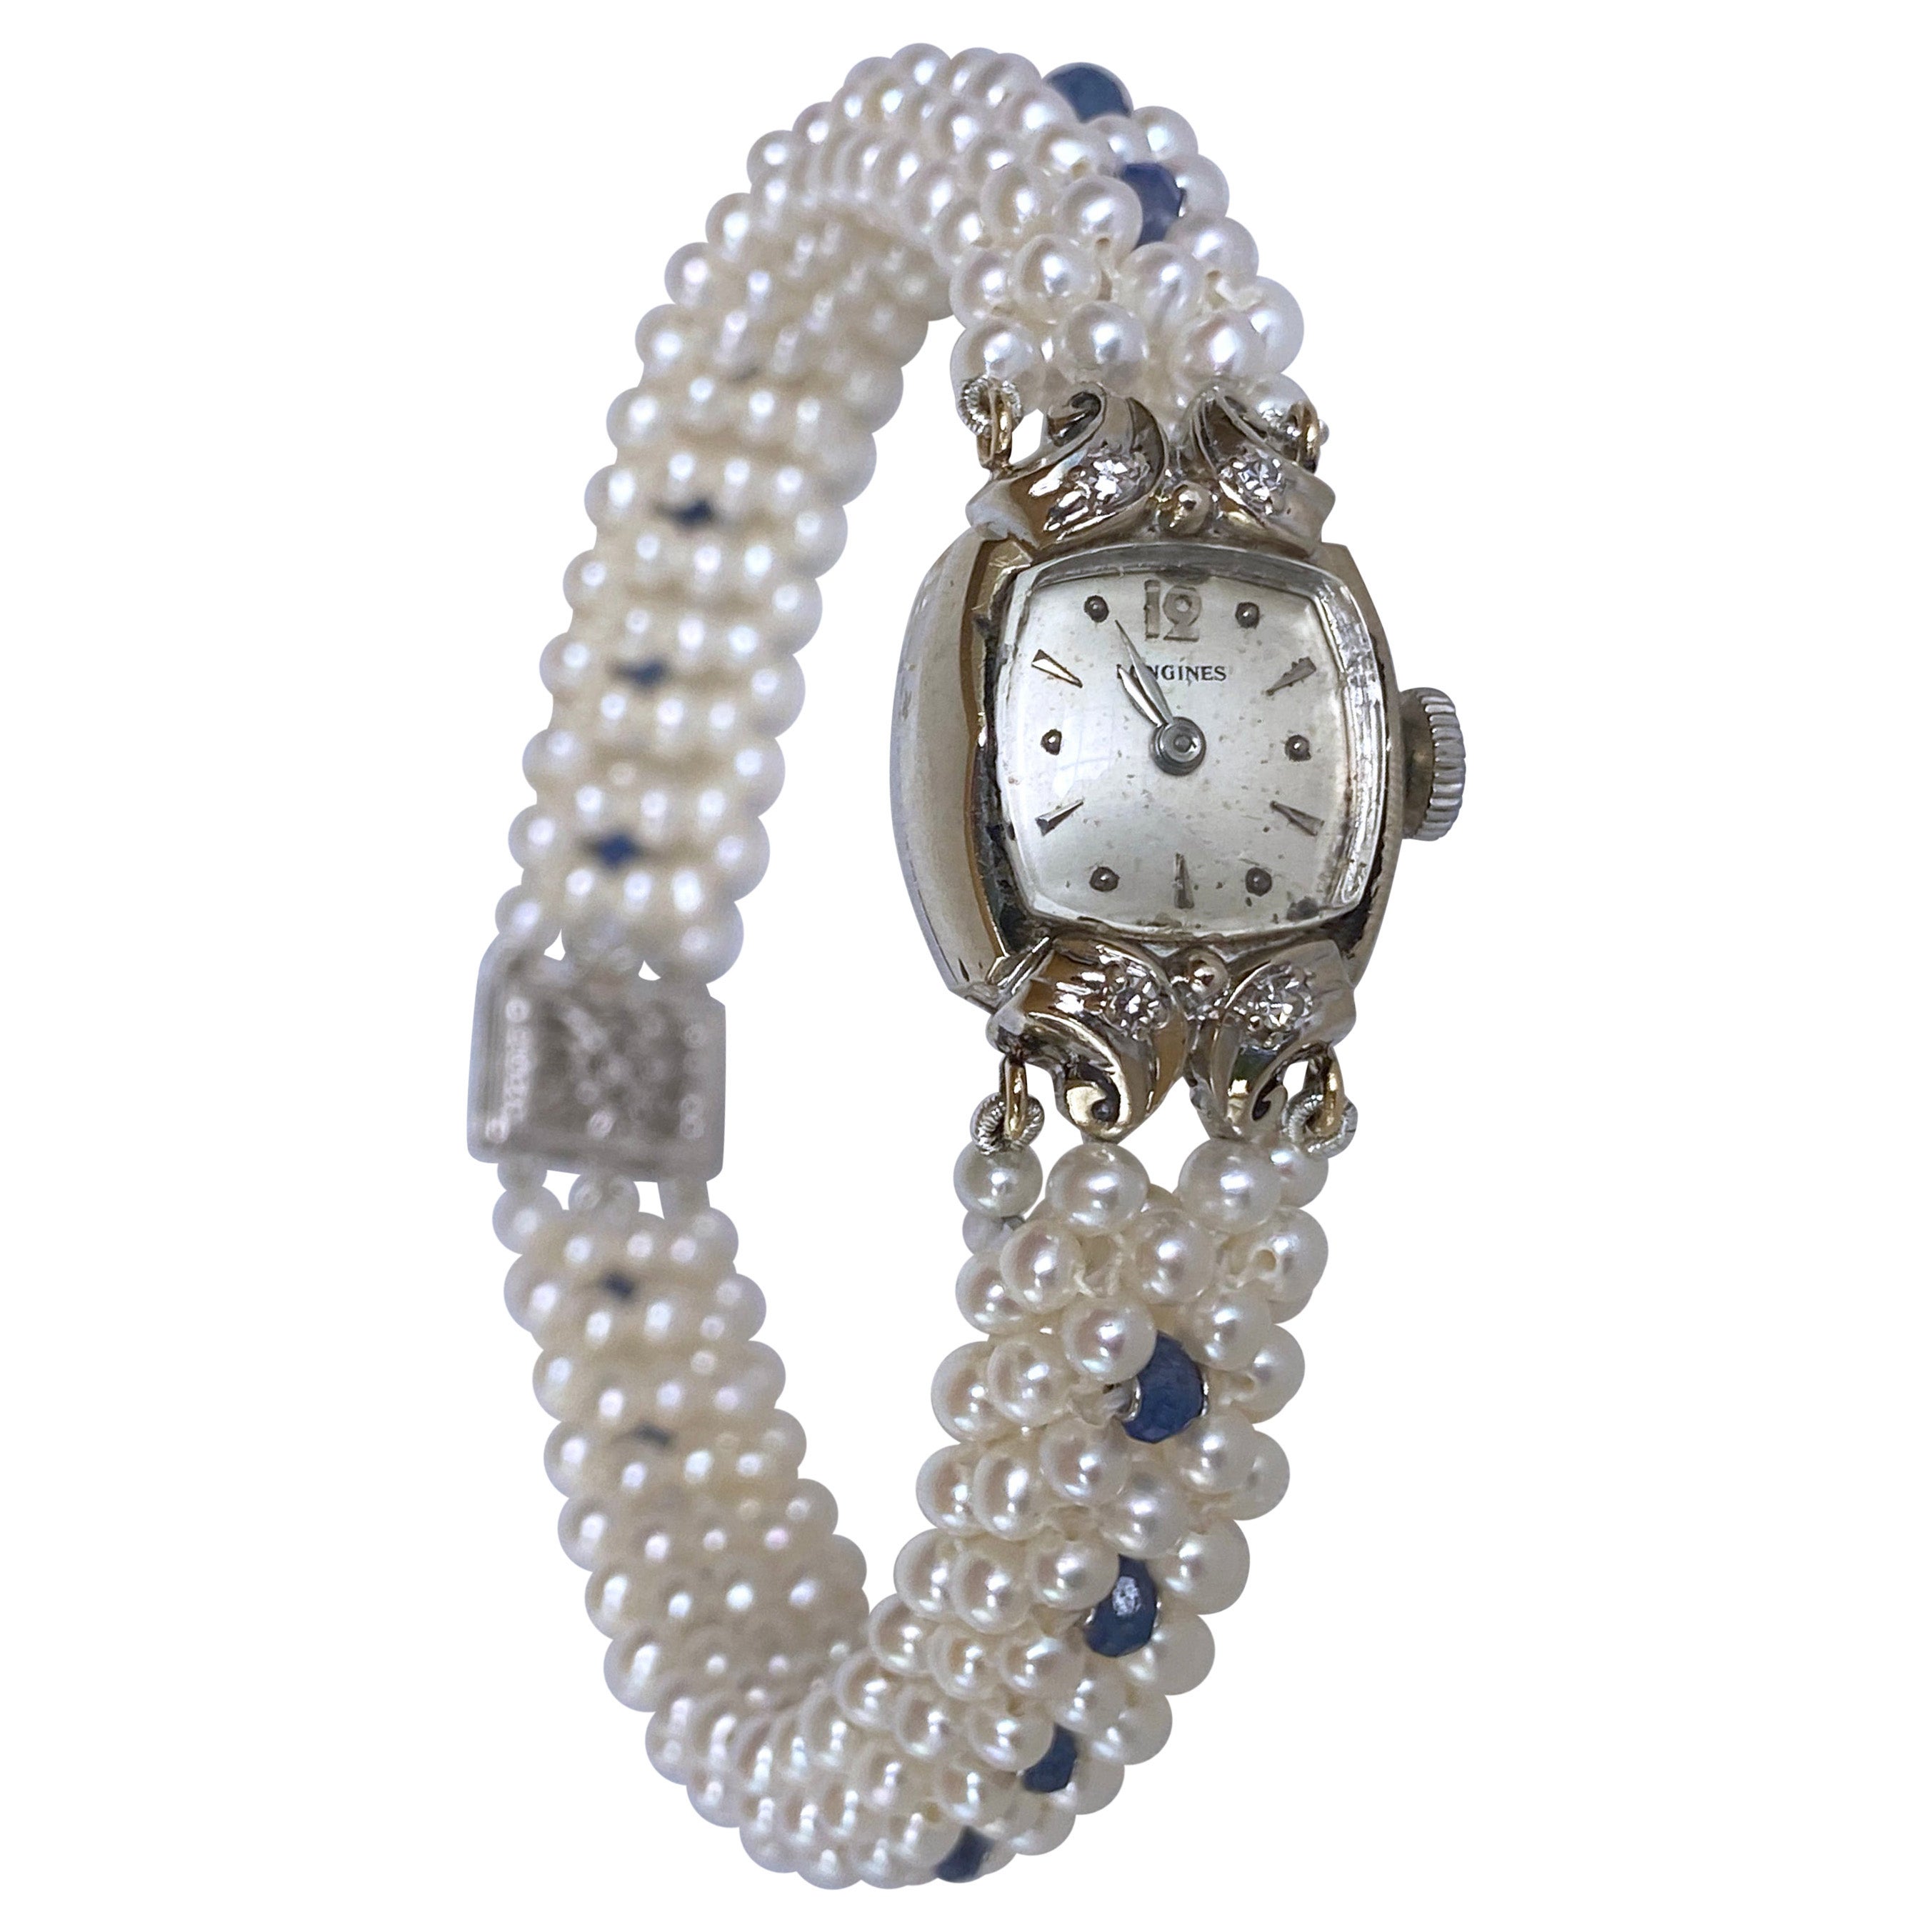 Marina J. Antique 14k Diamond Encrusted Watch with Blue Sapphire and Pearl Band